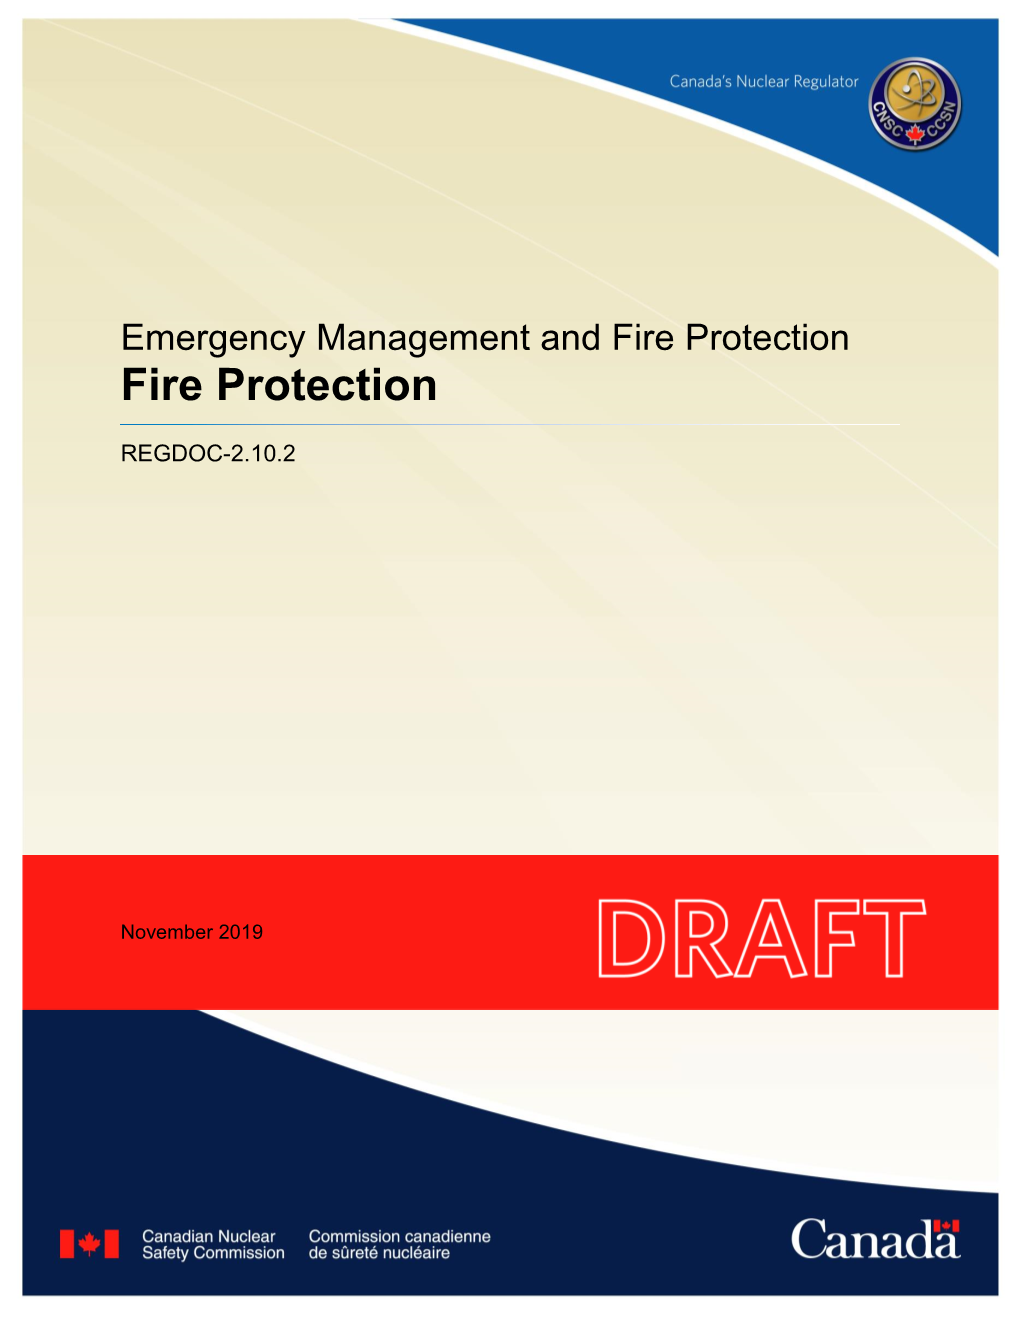 Fire Protection Fire Protection